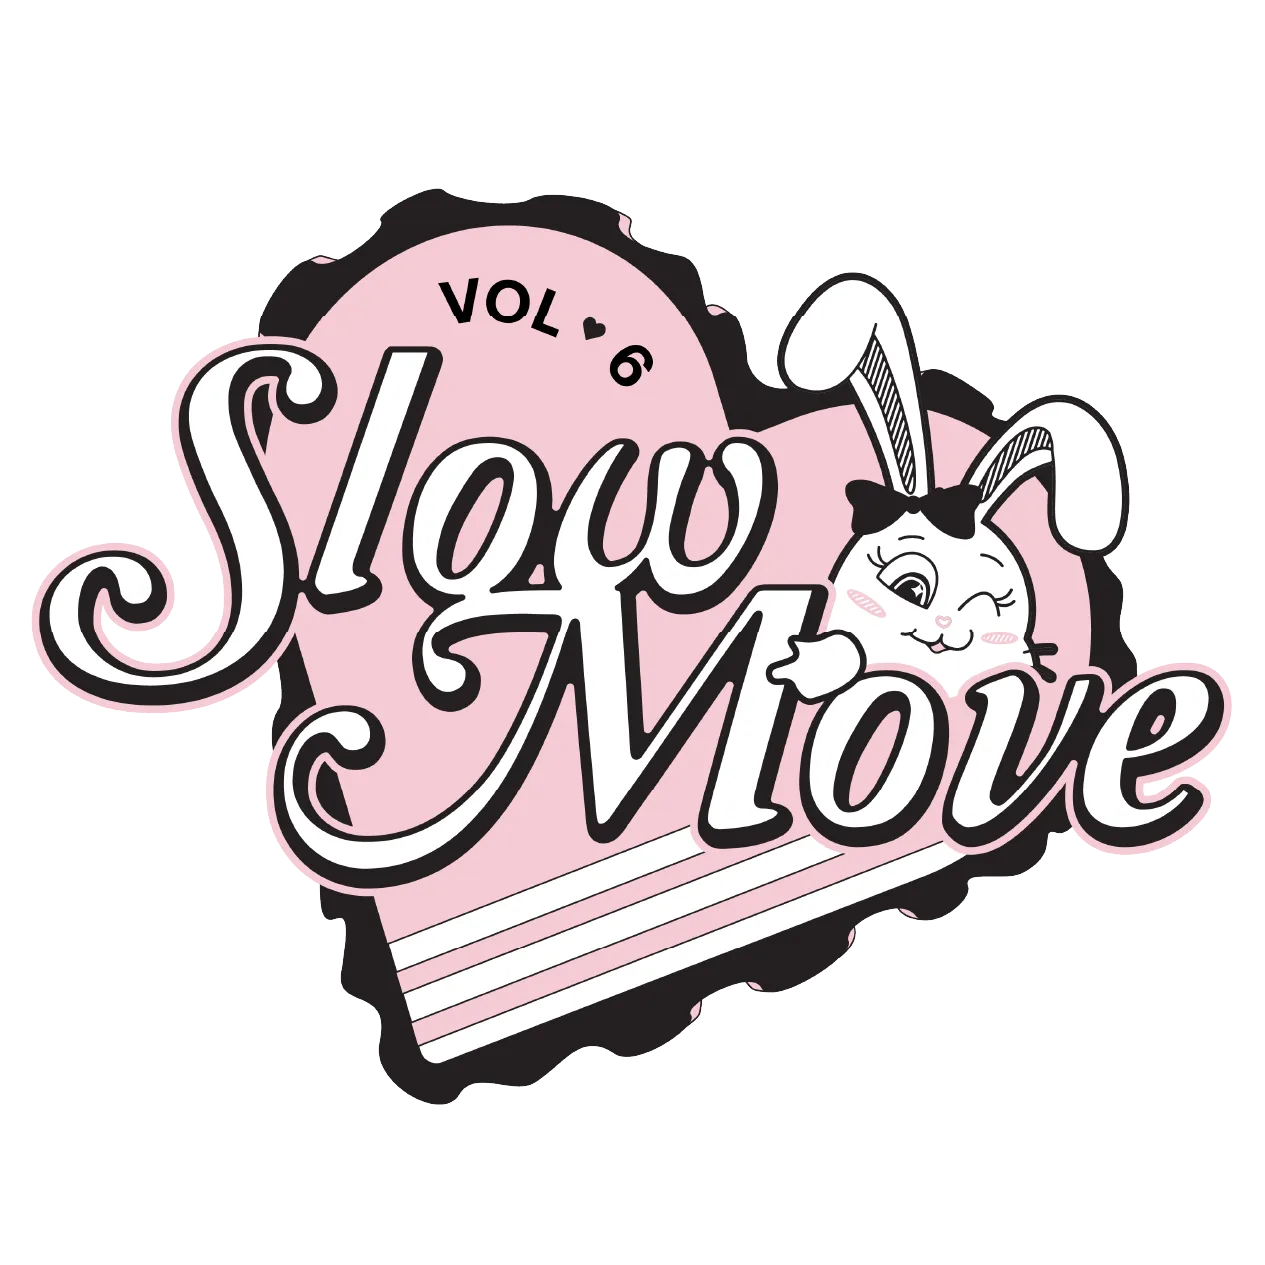 the logo for slow move vol 6